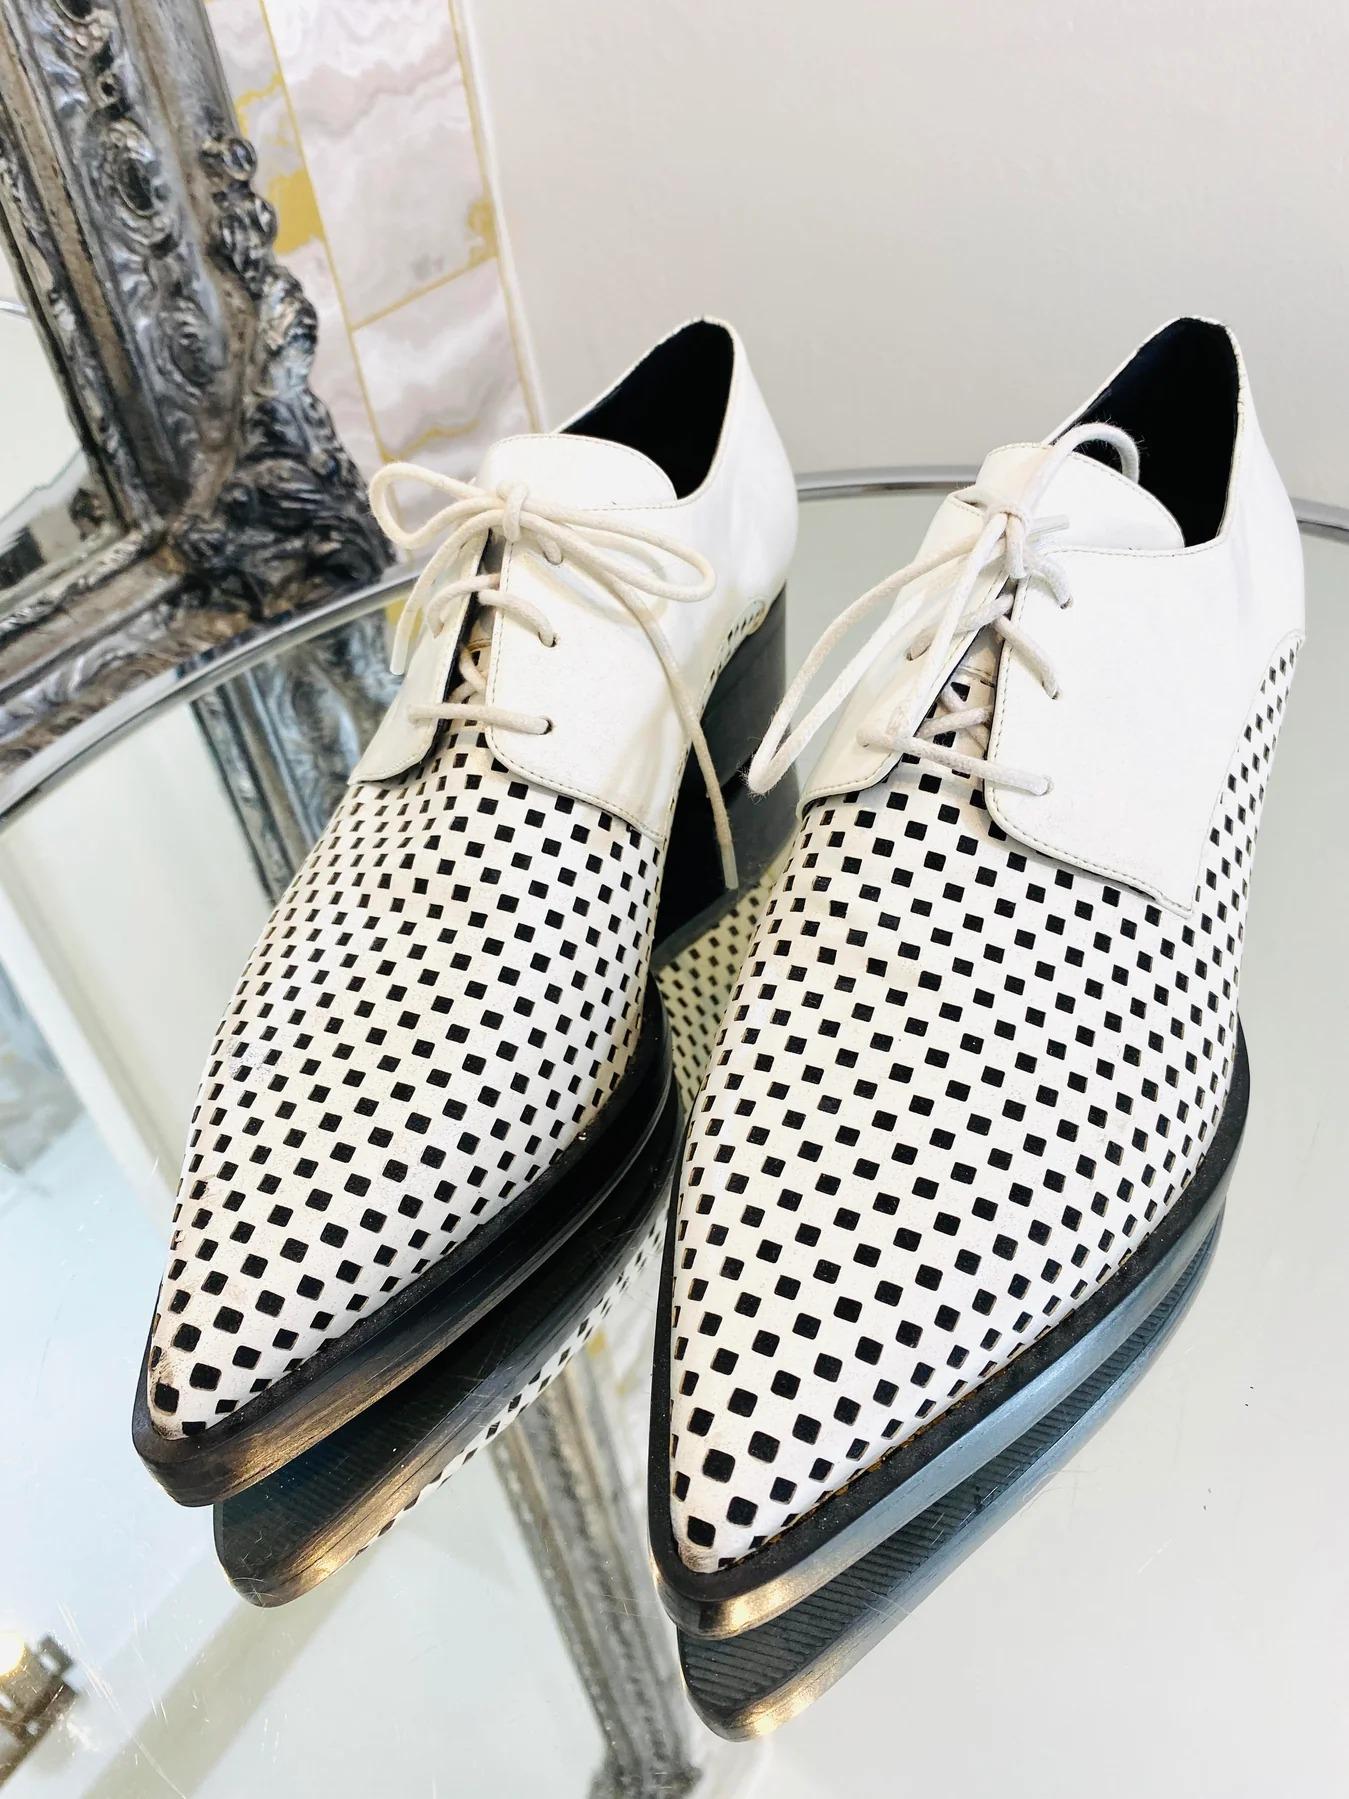 Stella McCartney Lace Up Oxfords In Excellent Condition For Sale In London, GB